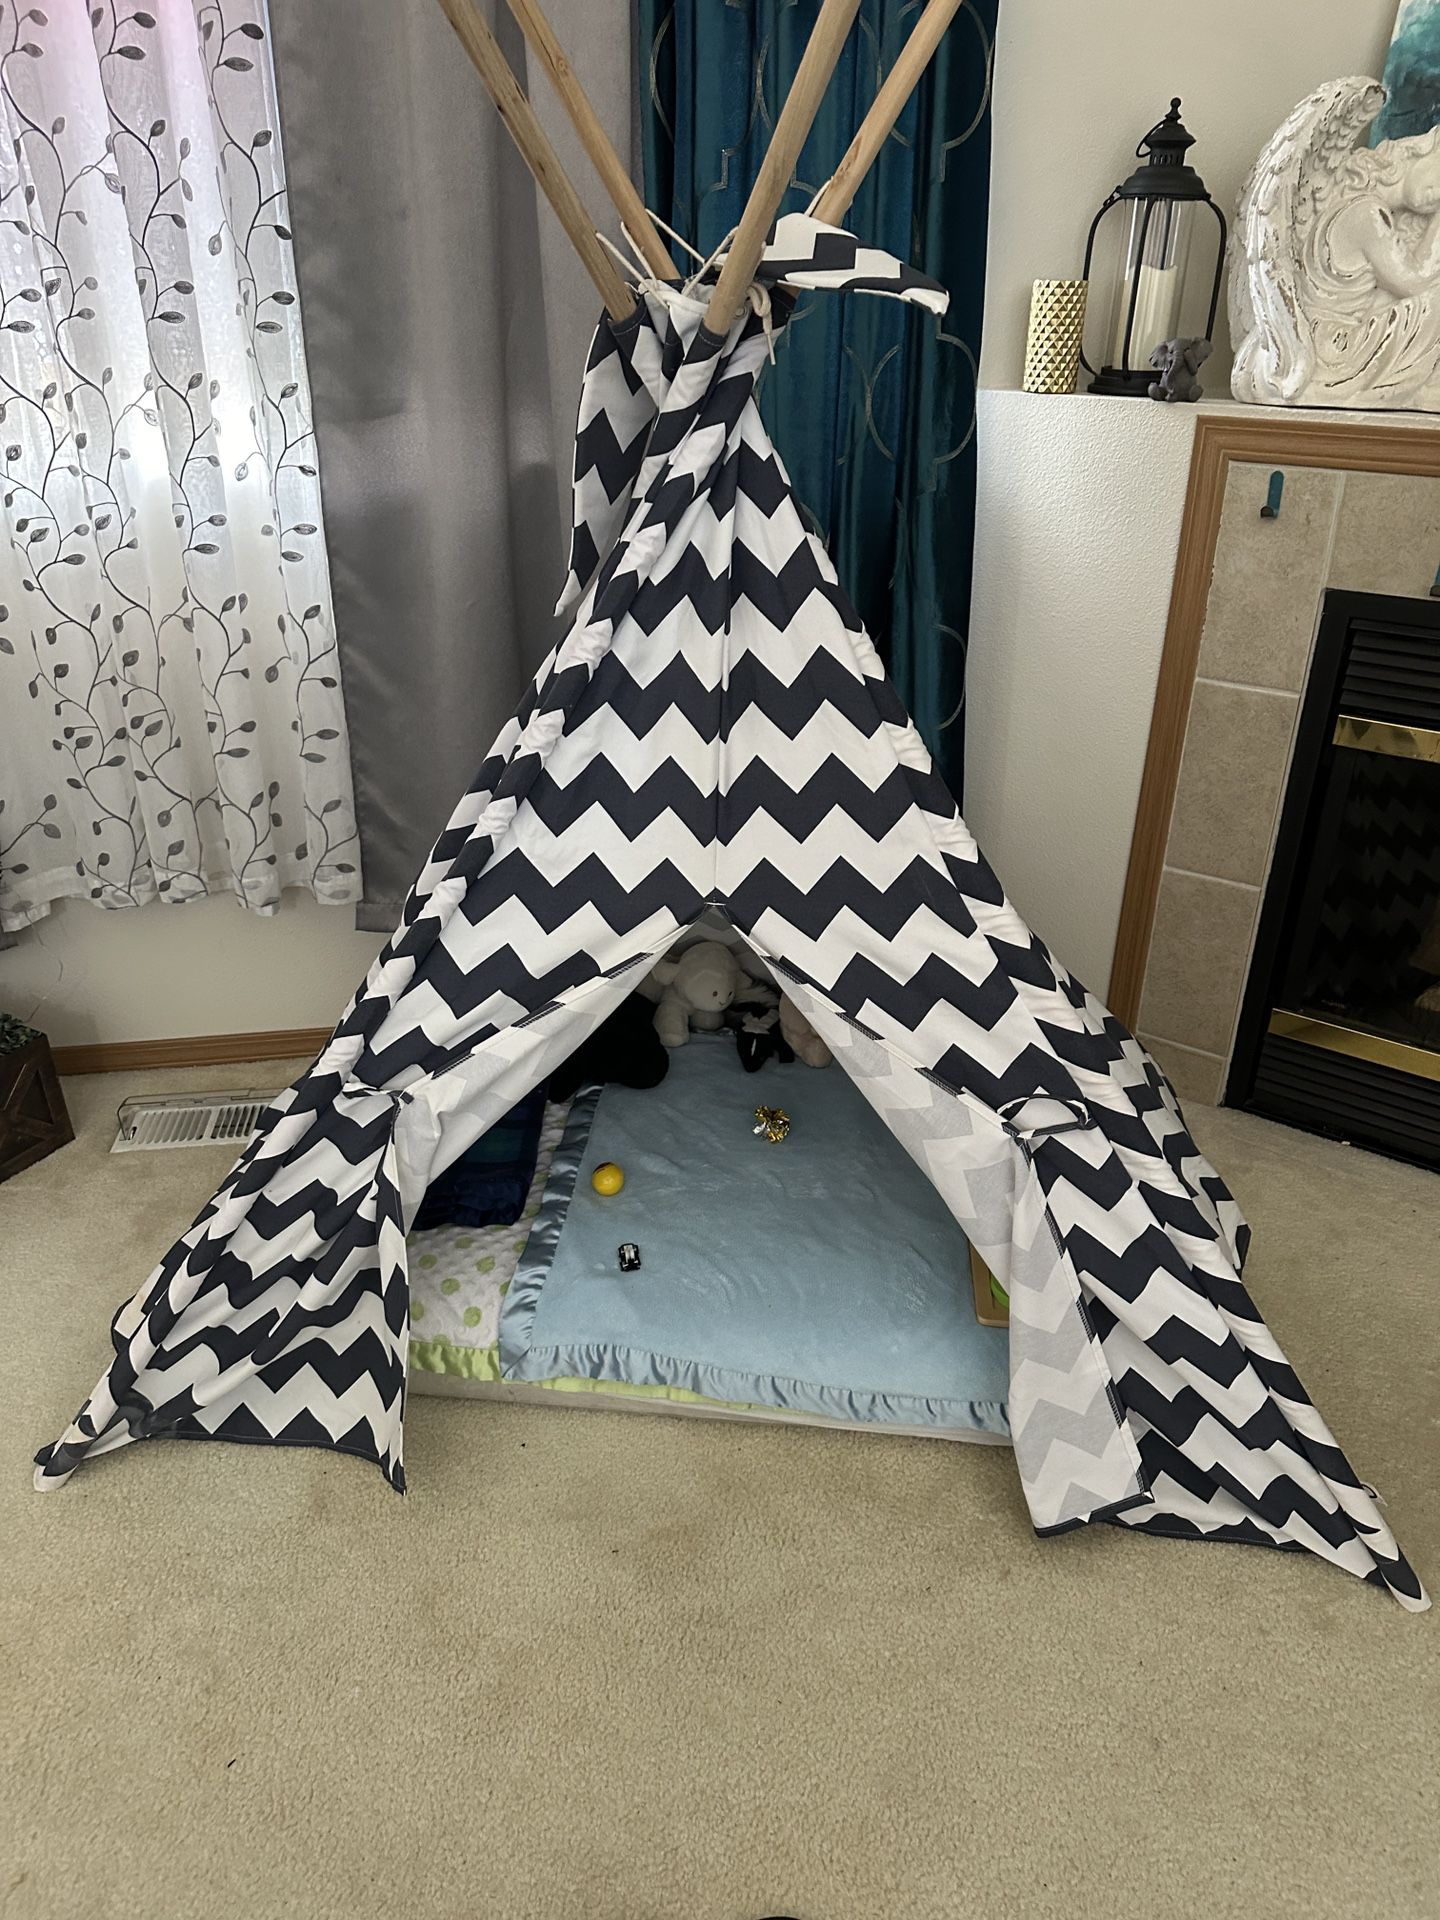 Canvas Tent With Mattress